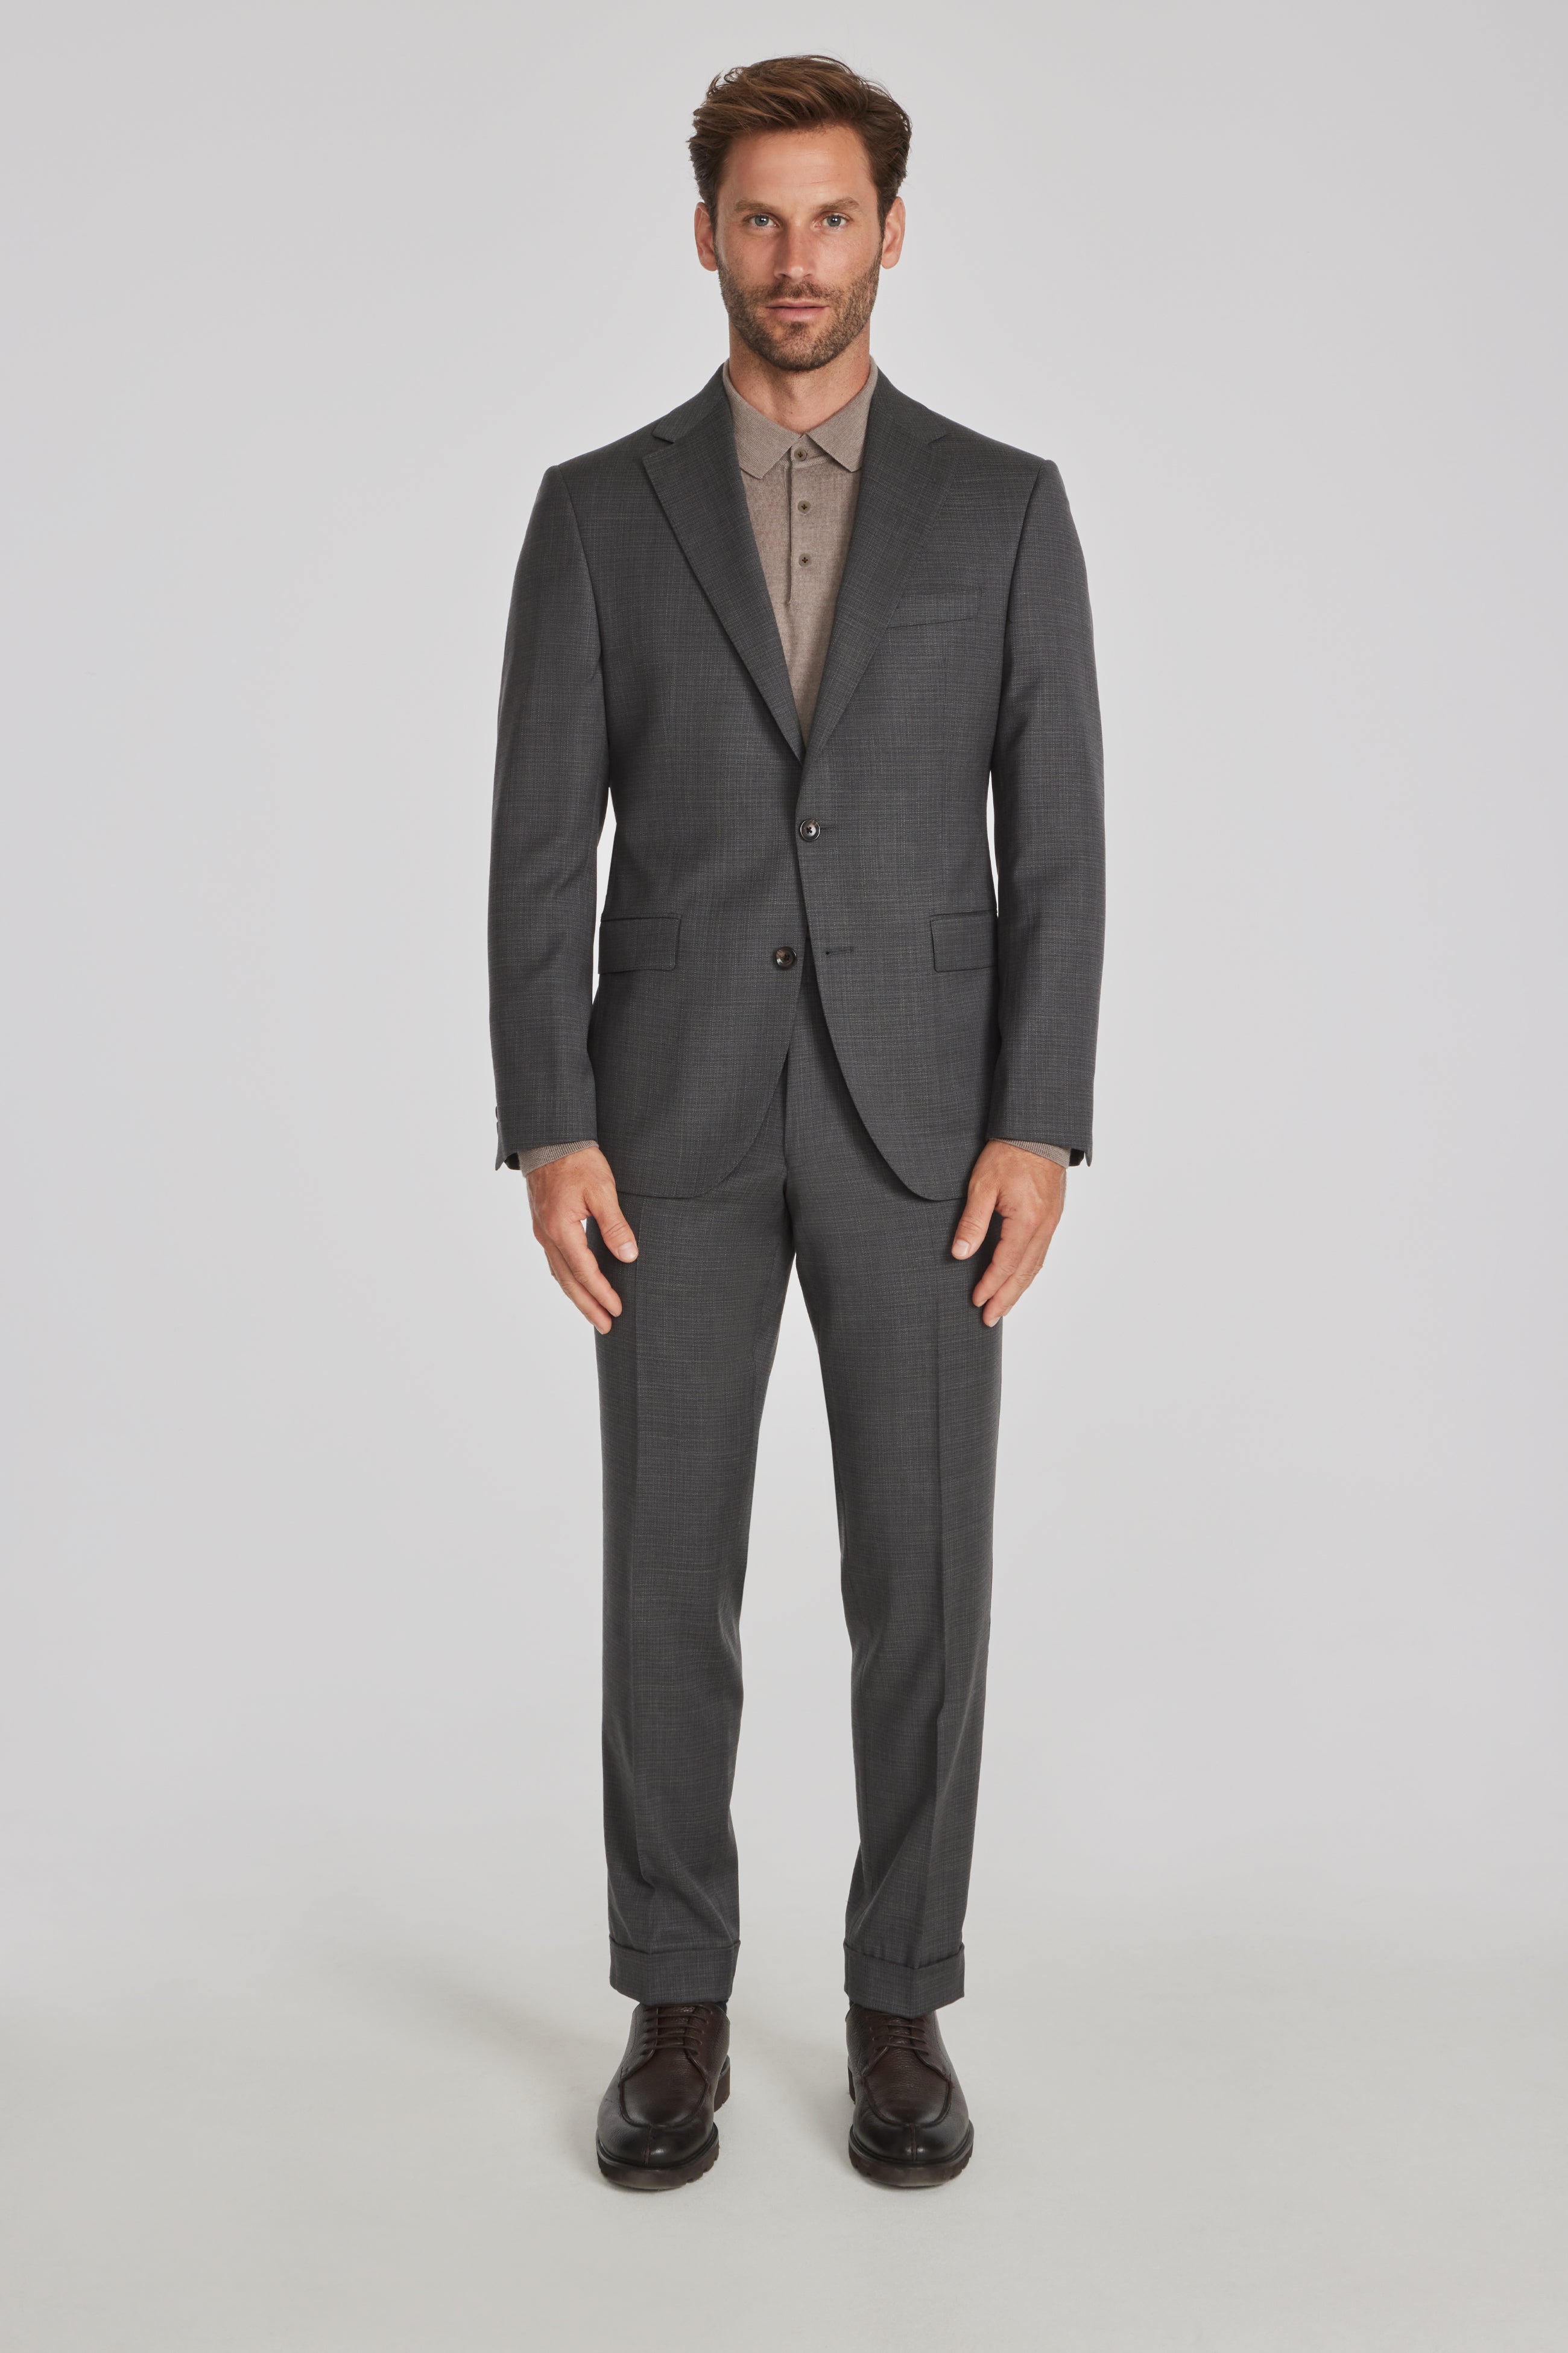 Yonder Blue Checks-Plaid Premium wool blend Double Breasted Suit For Men.